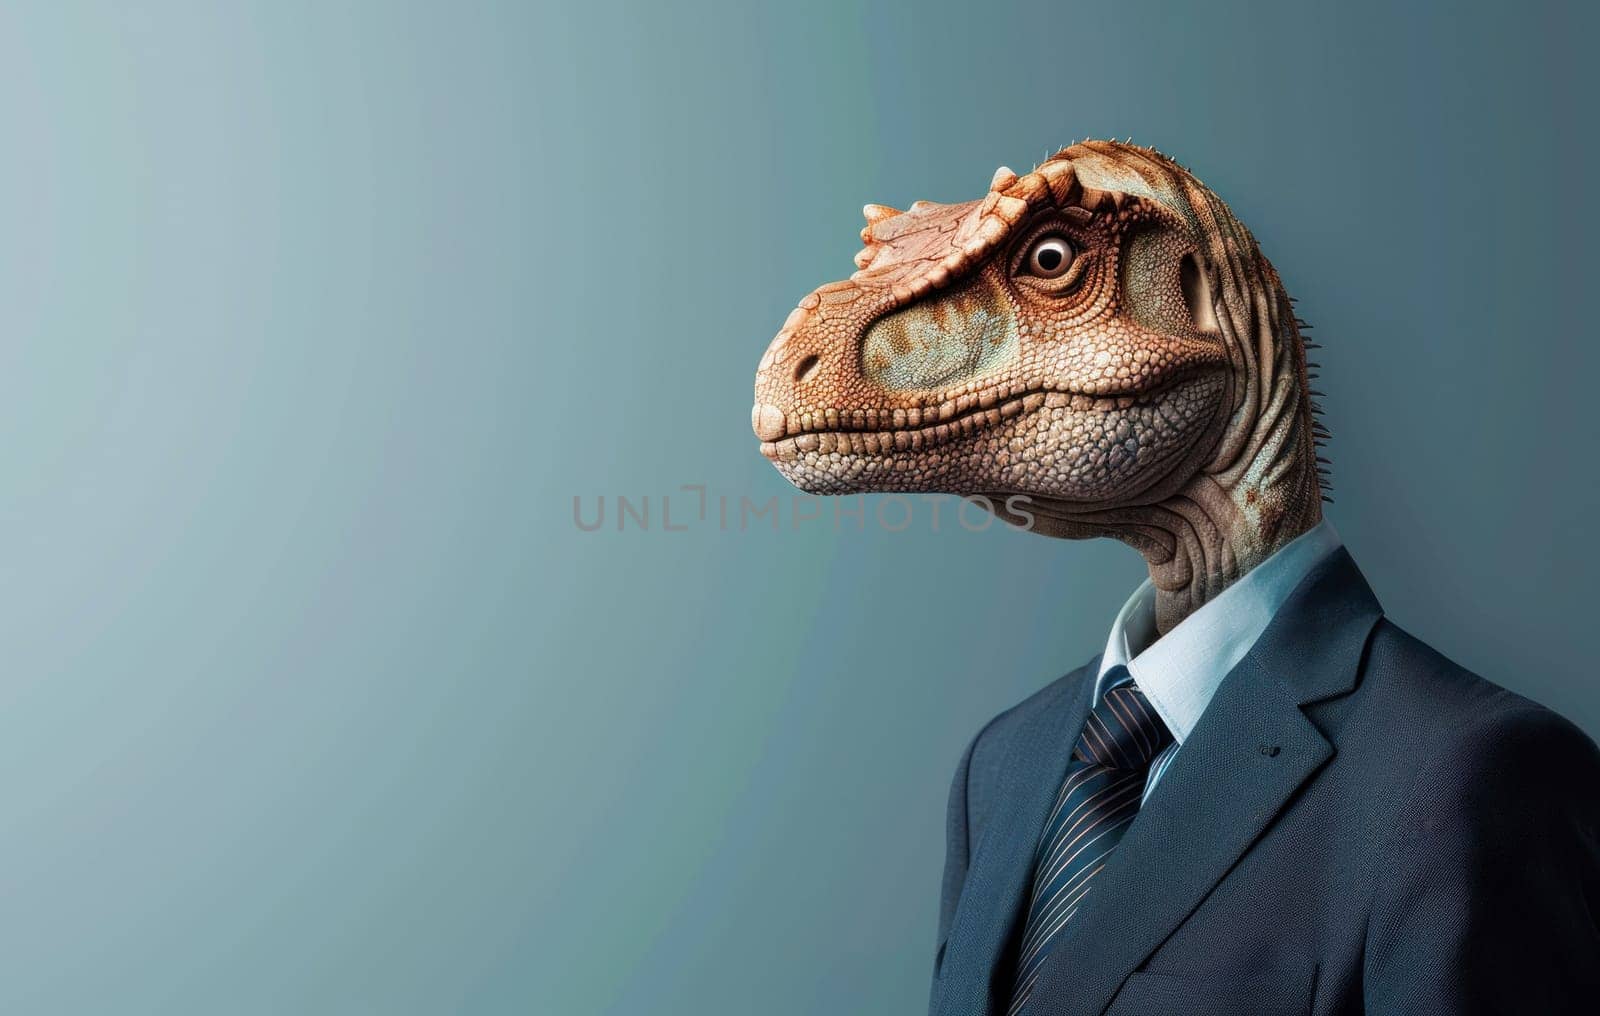 Elegant tyrannosaurus rex in formal attire on gray background for business and fashion concept